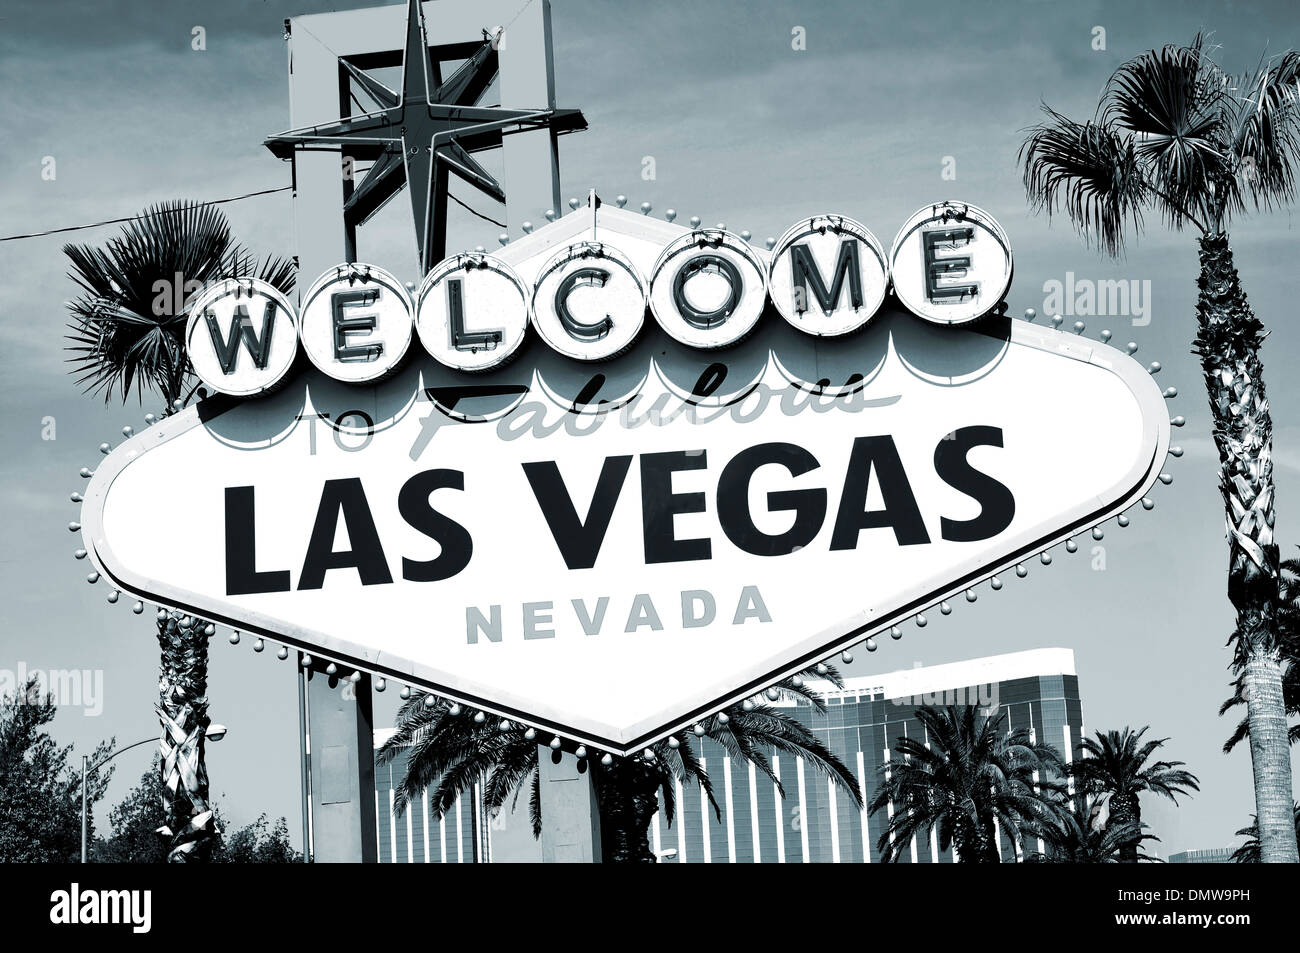 Welcome to Fabulous Las Vegas sign in black and white Stock Photo